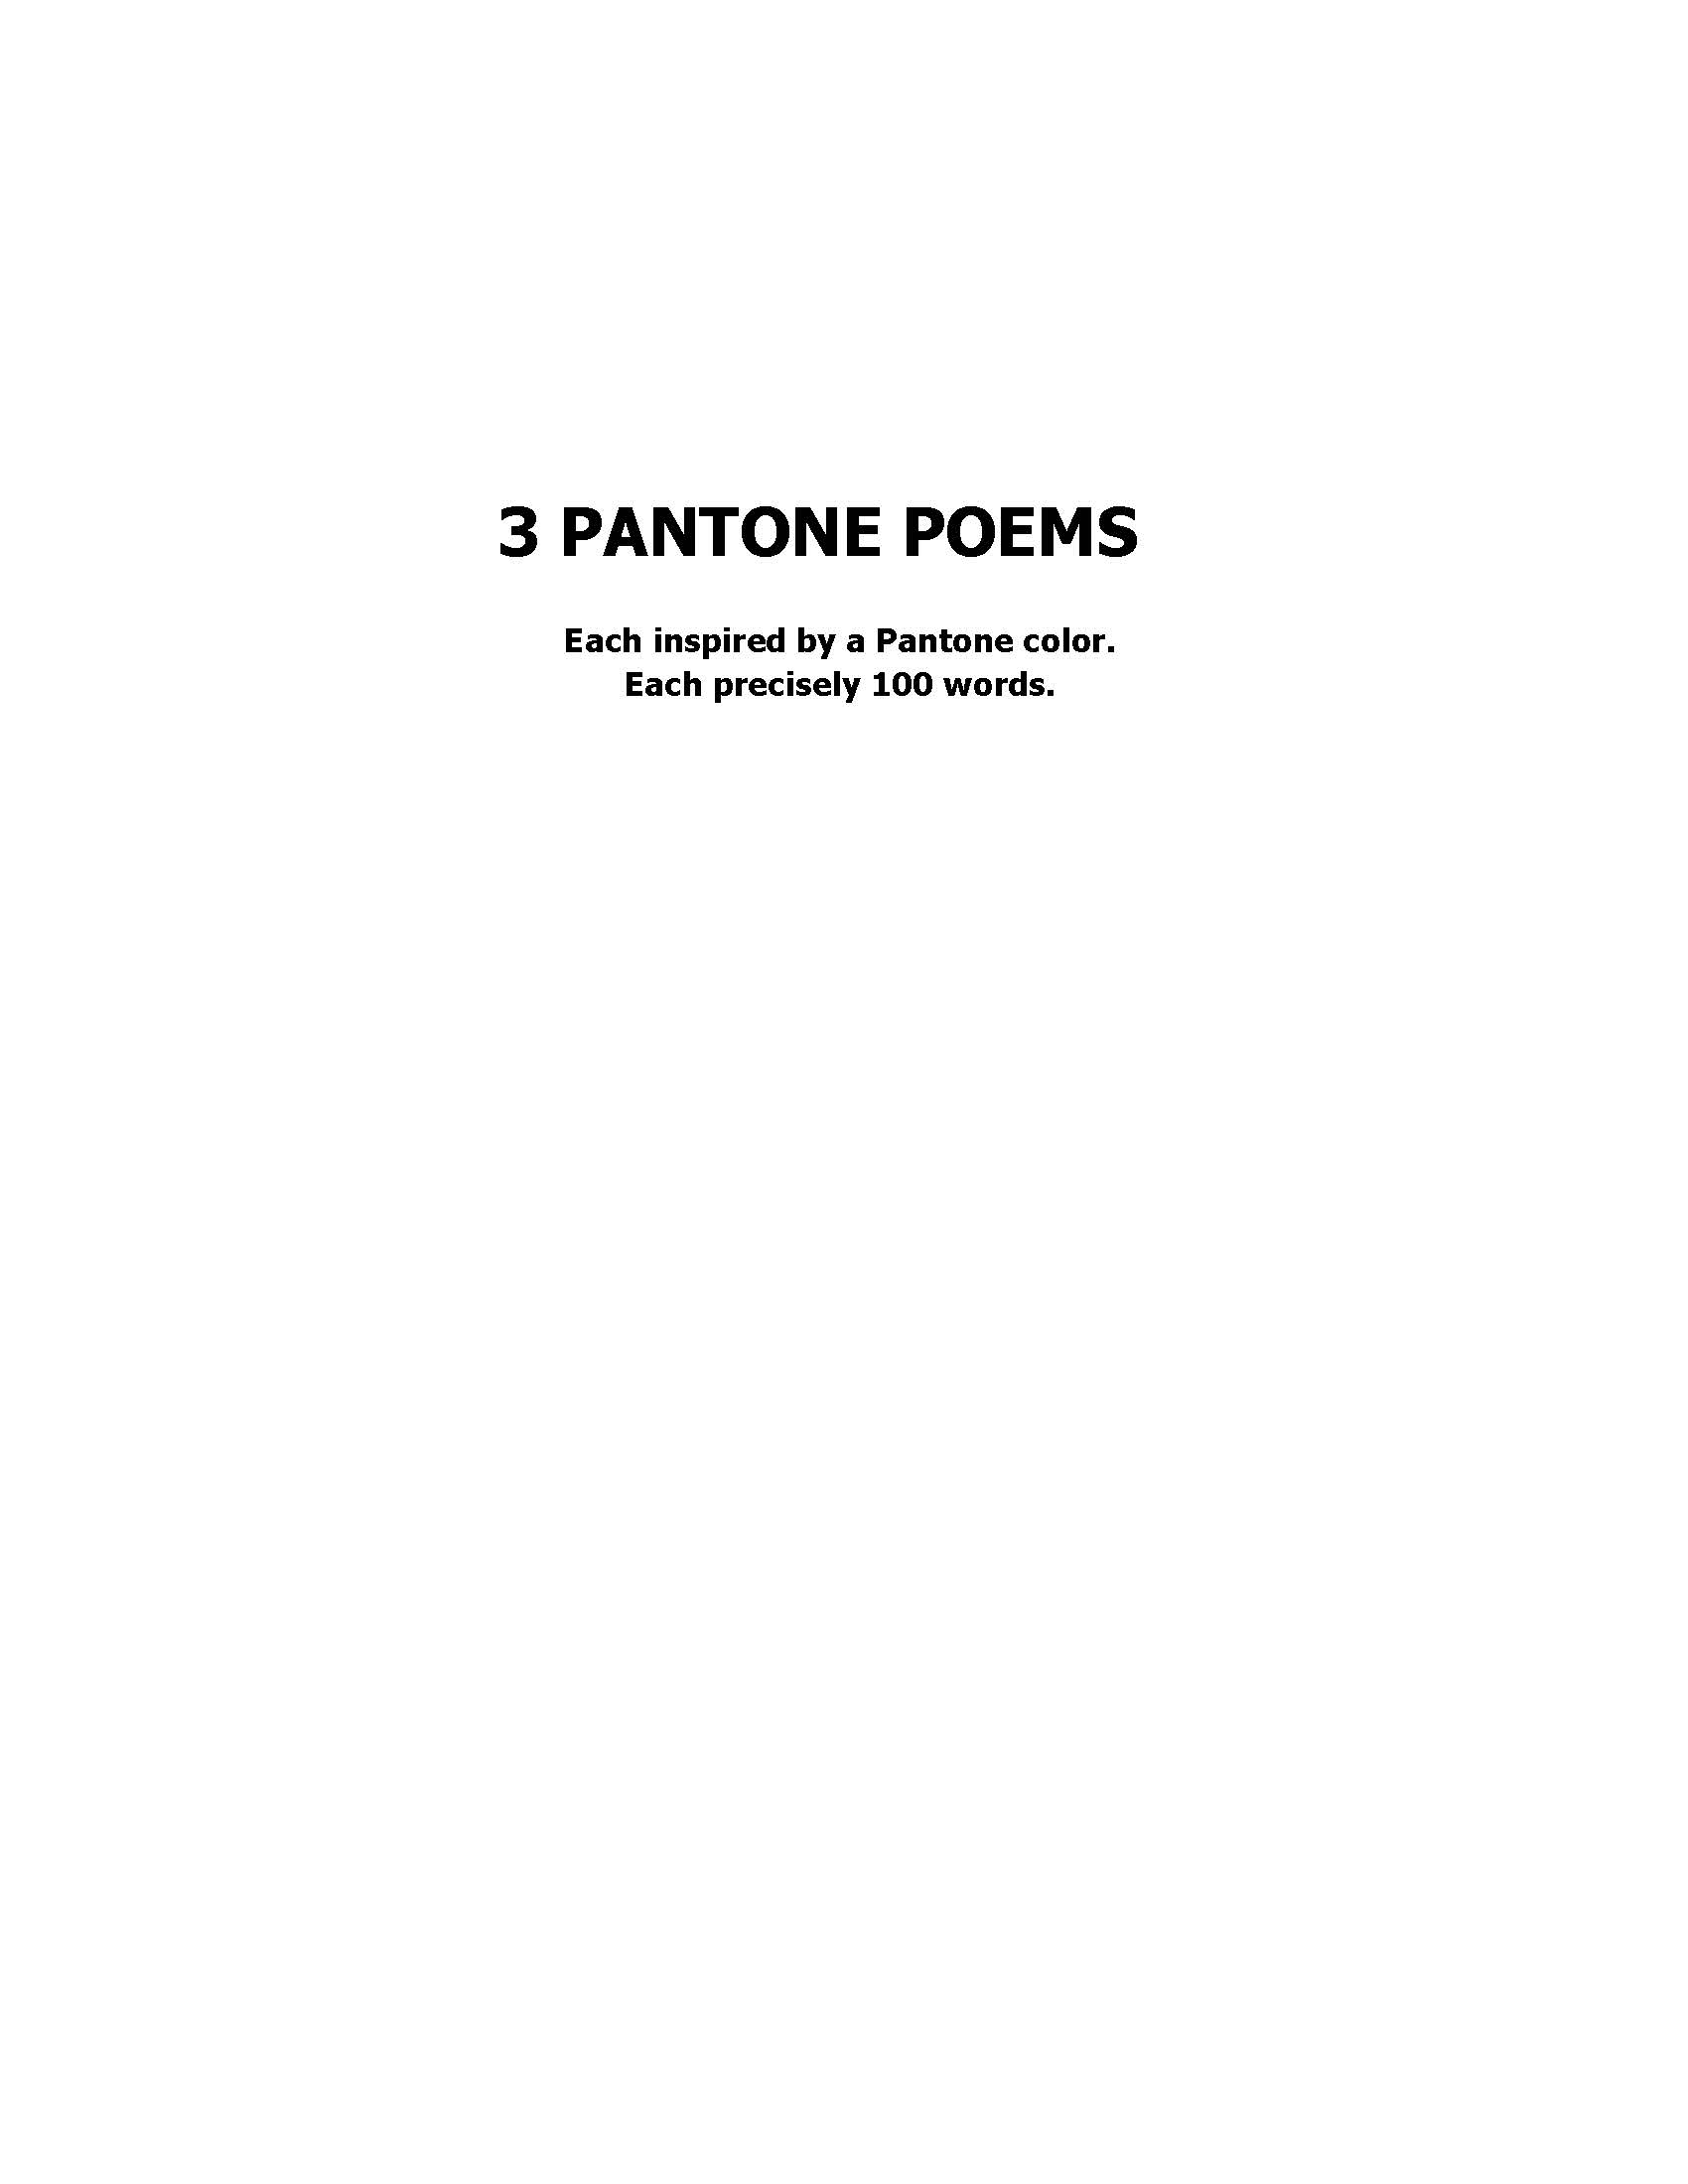 Image of 3 poems inspired by pantone colors by L Swartz